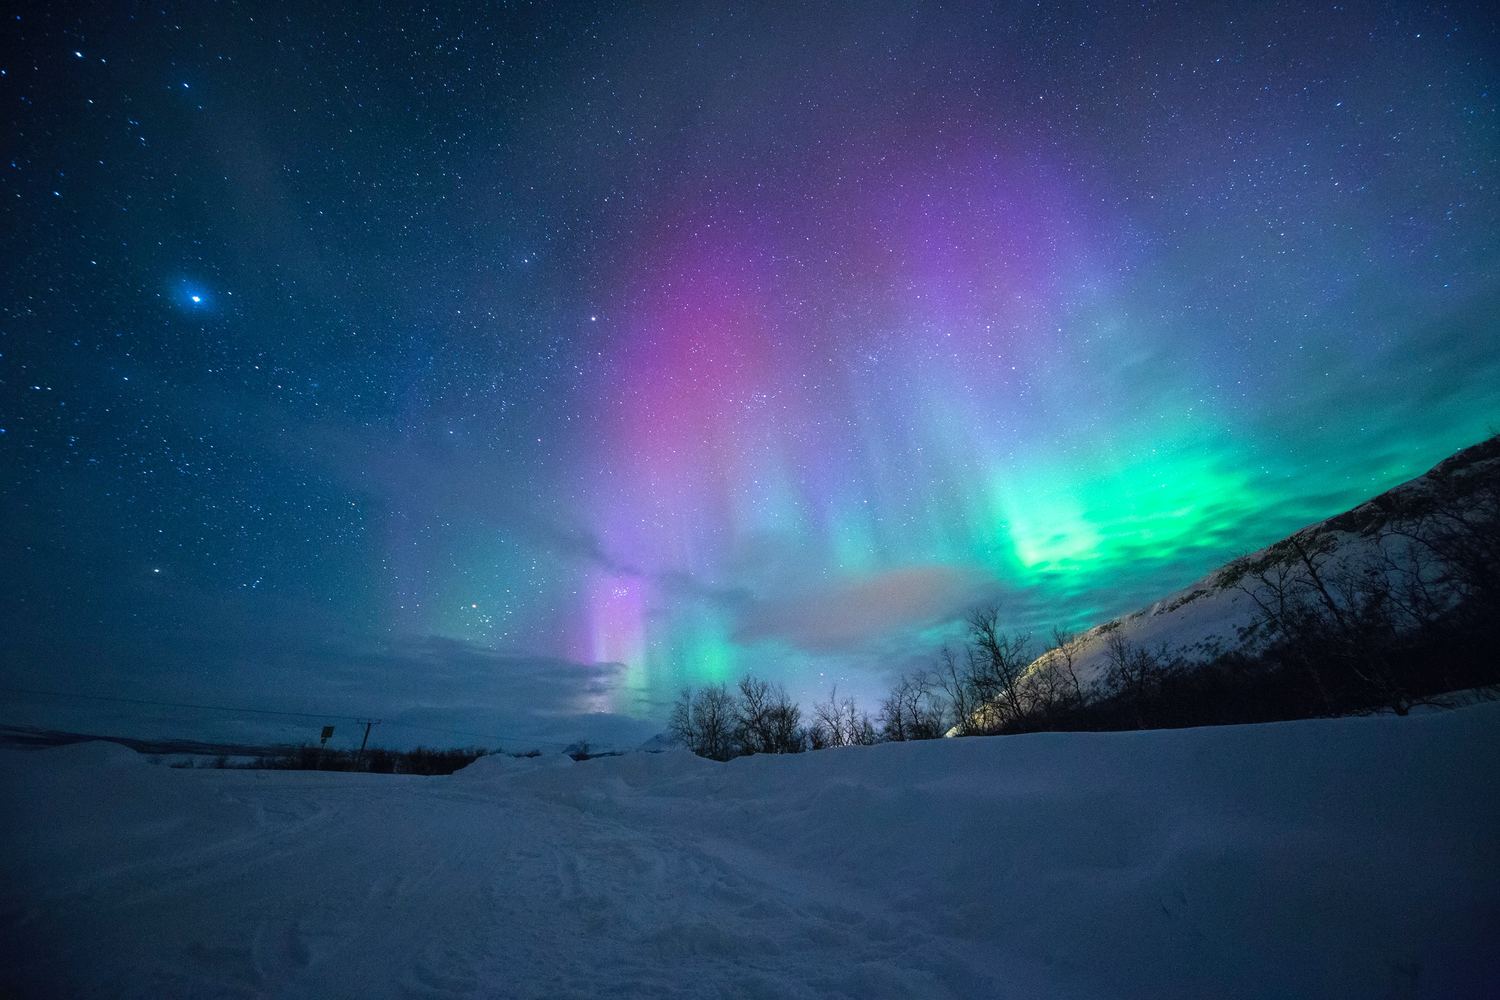 What caused the aurora lights in India to be visible from Ladakh?